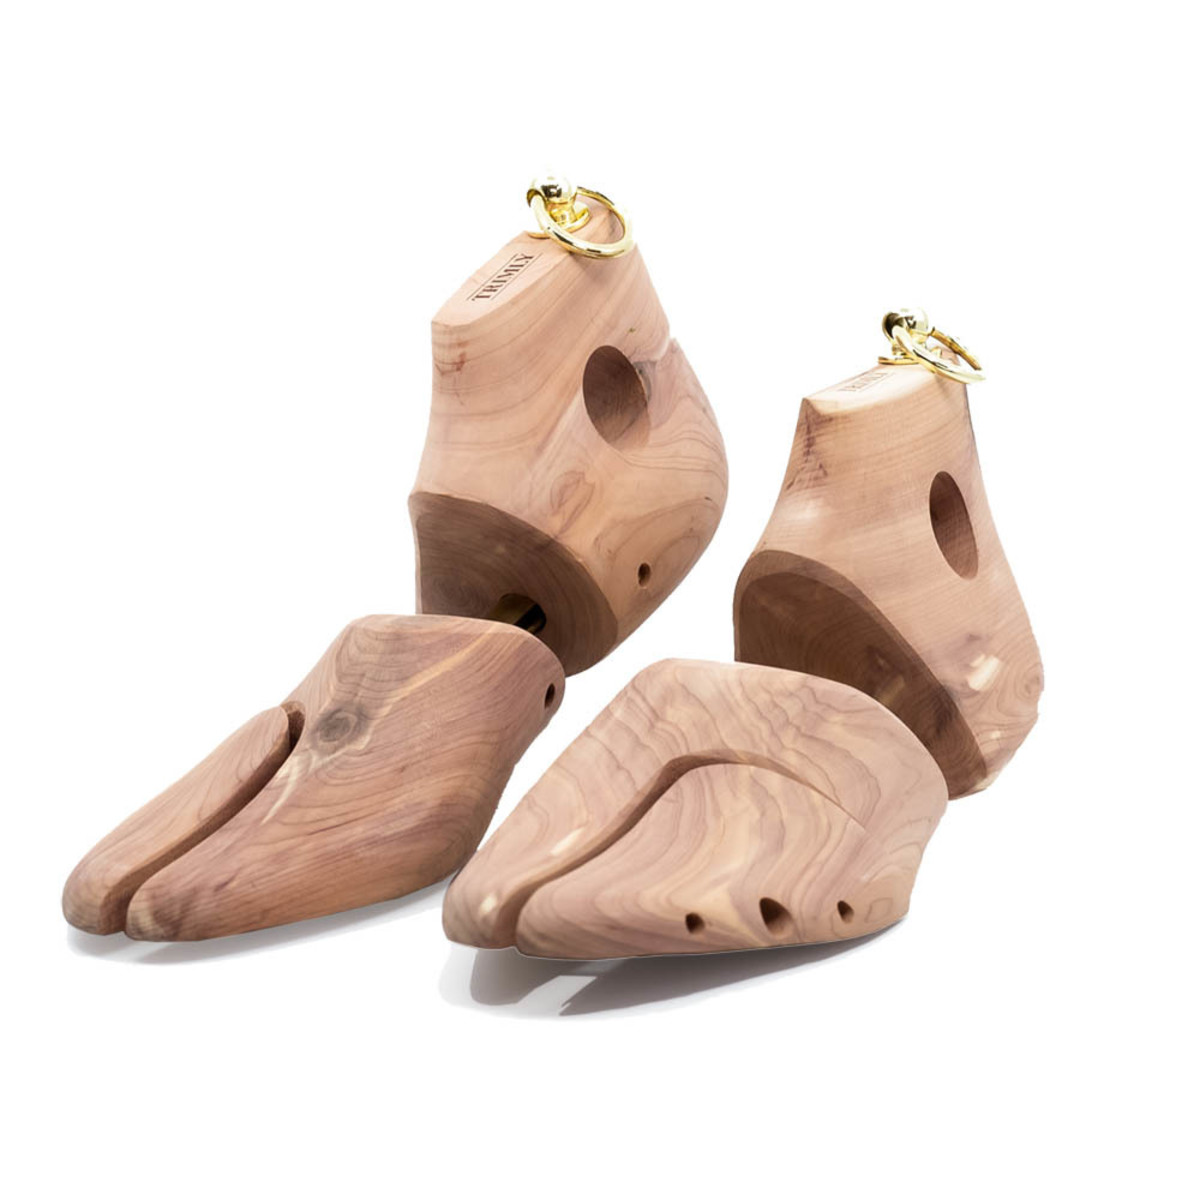 Cedar shoe trees absorb moisture and sweat to prevent odors